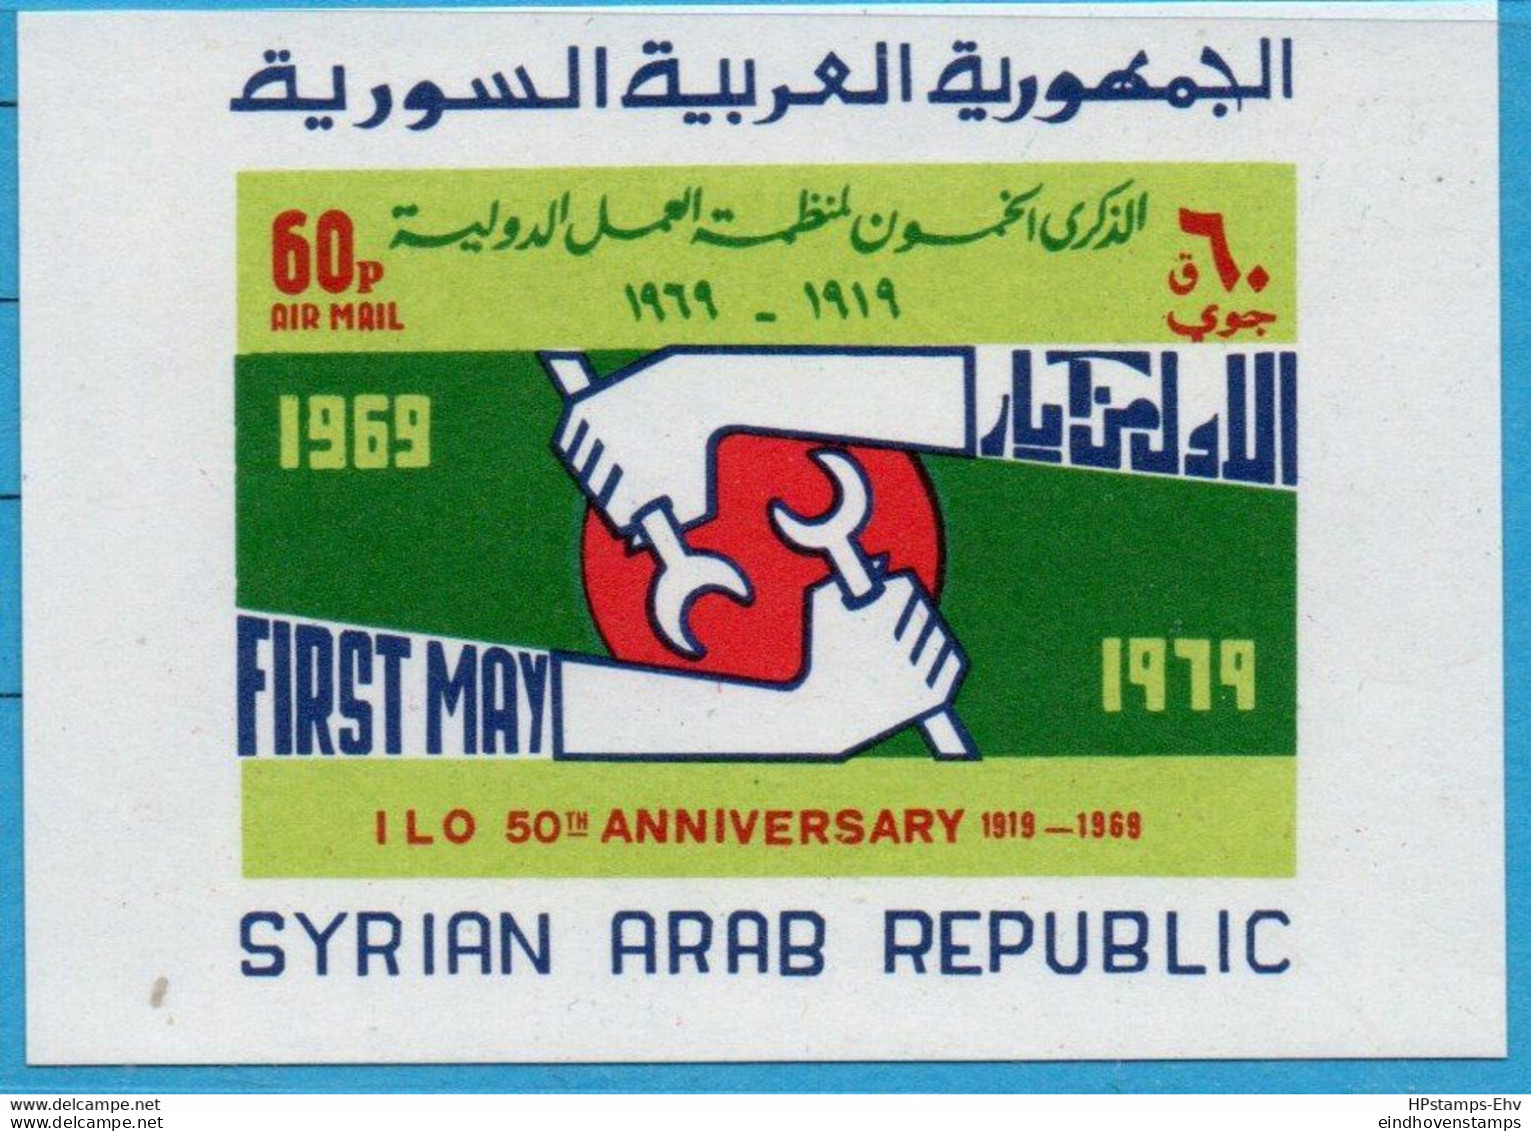 Middle East 1969 ILO Block Issue MNH 2212.2606 International Labour Organisation, Hand With Wrench - IAO